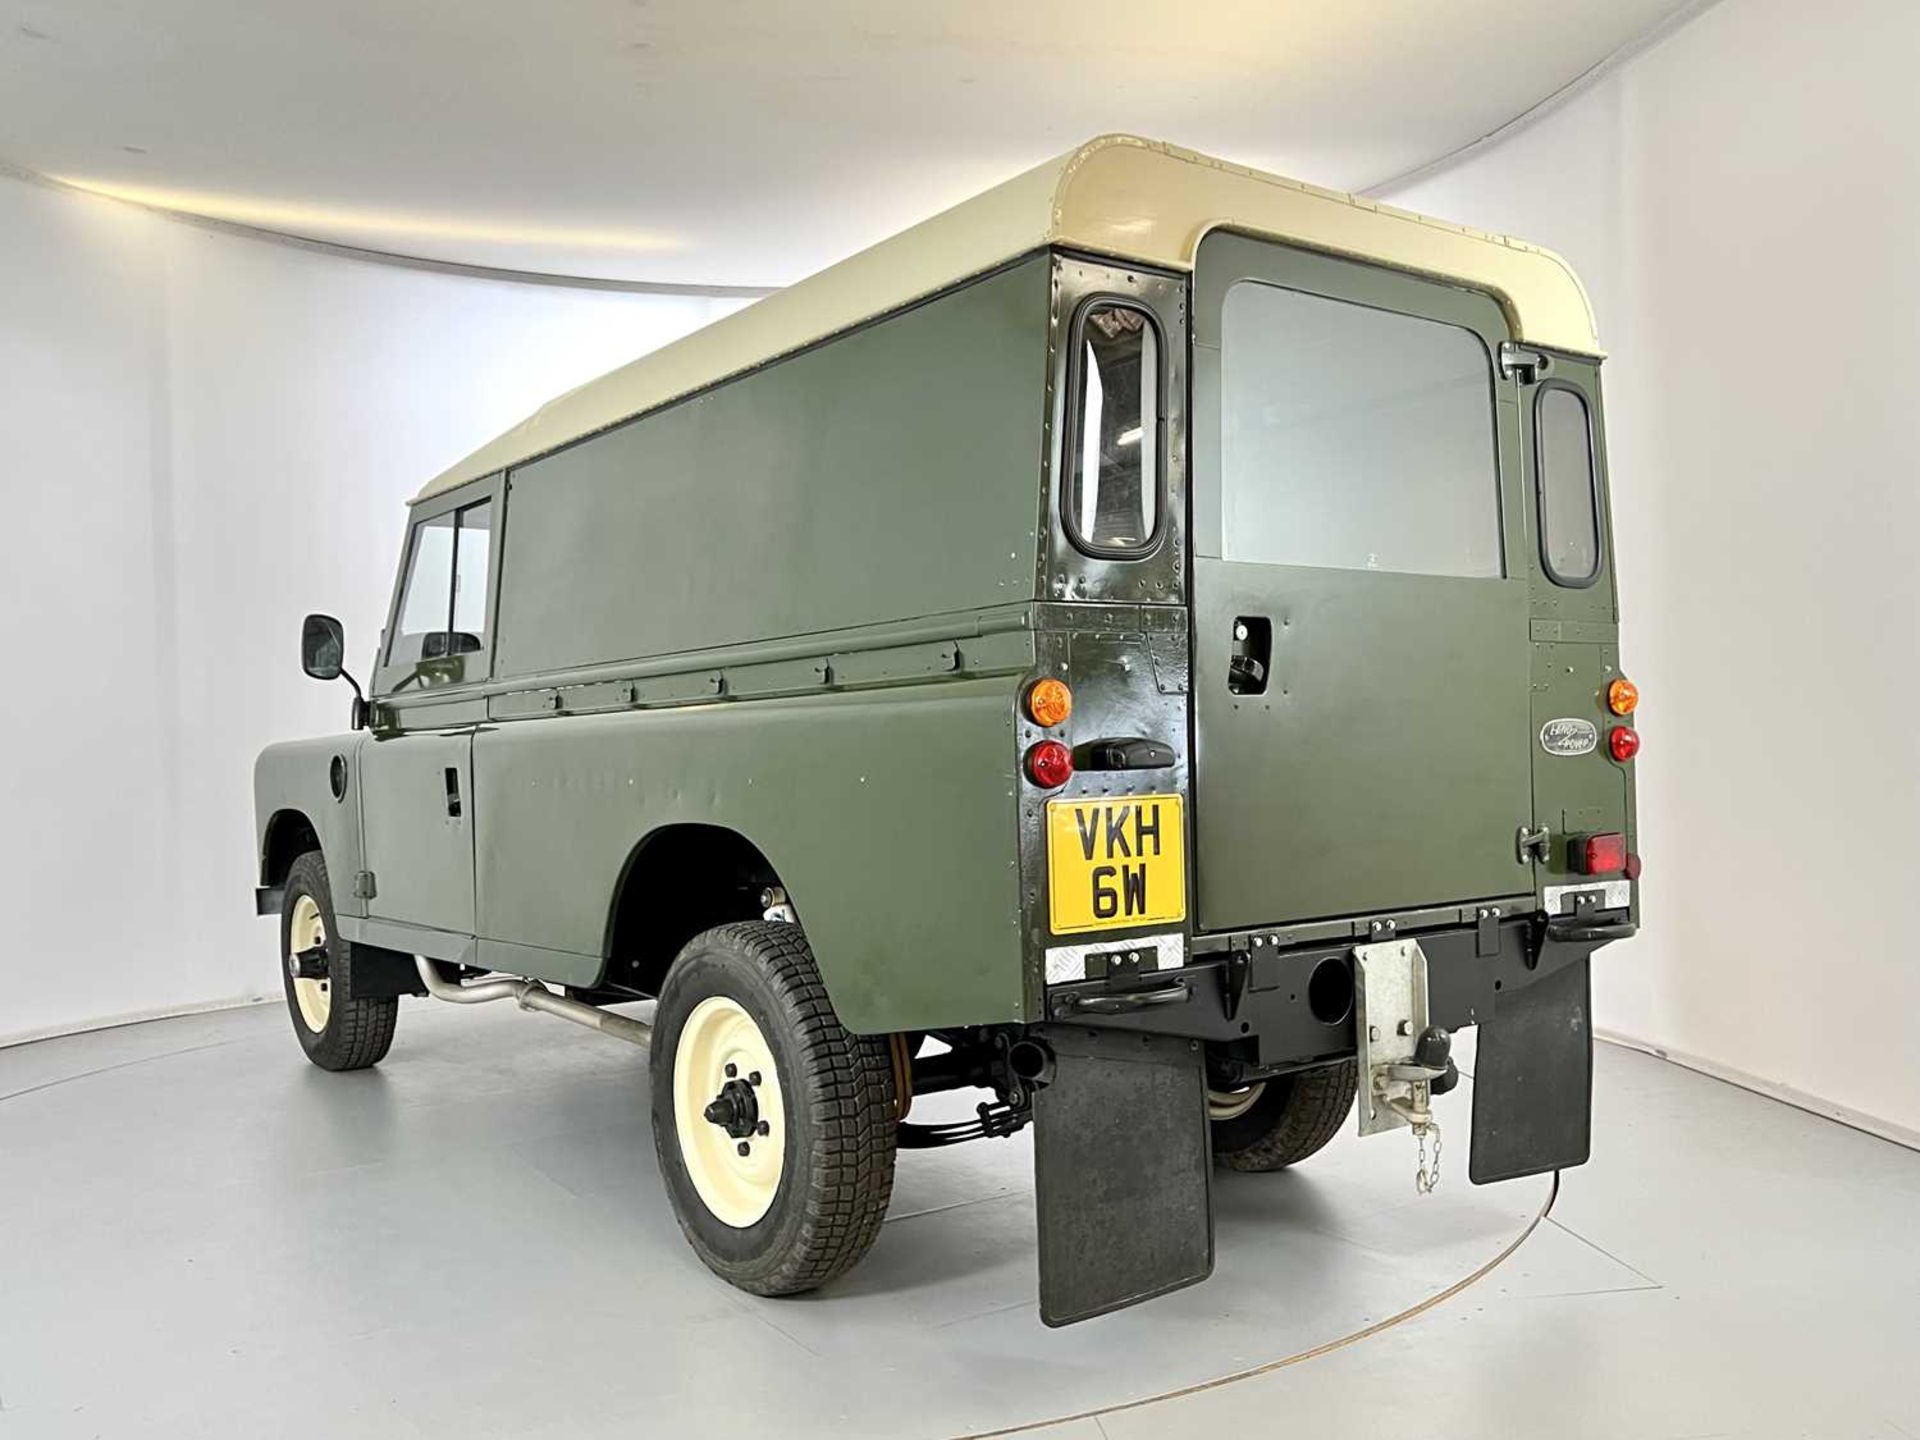 1981 Land Rover Series 3 - 6 Cylinder - Image 7 of 31